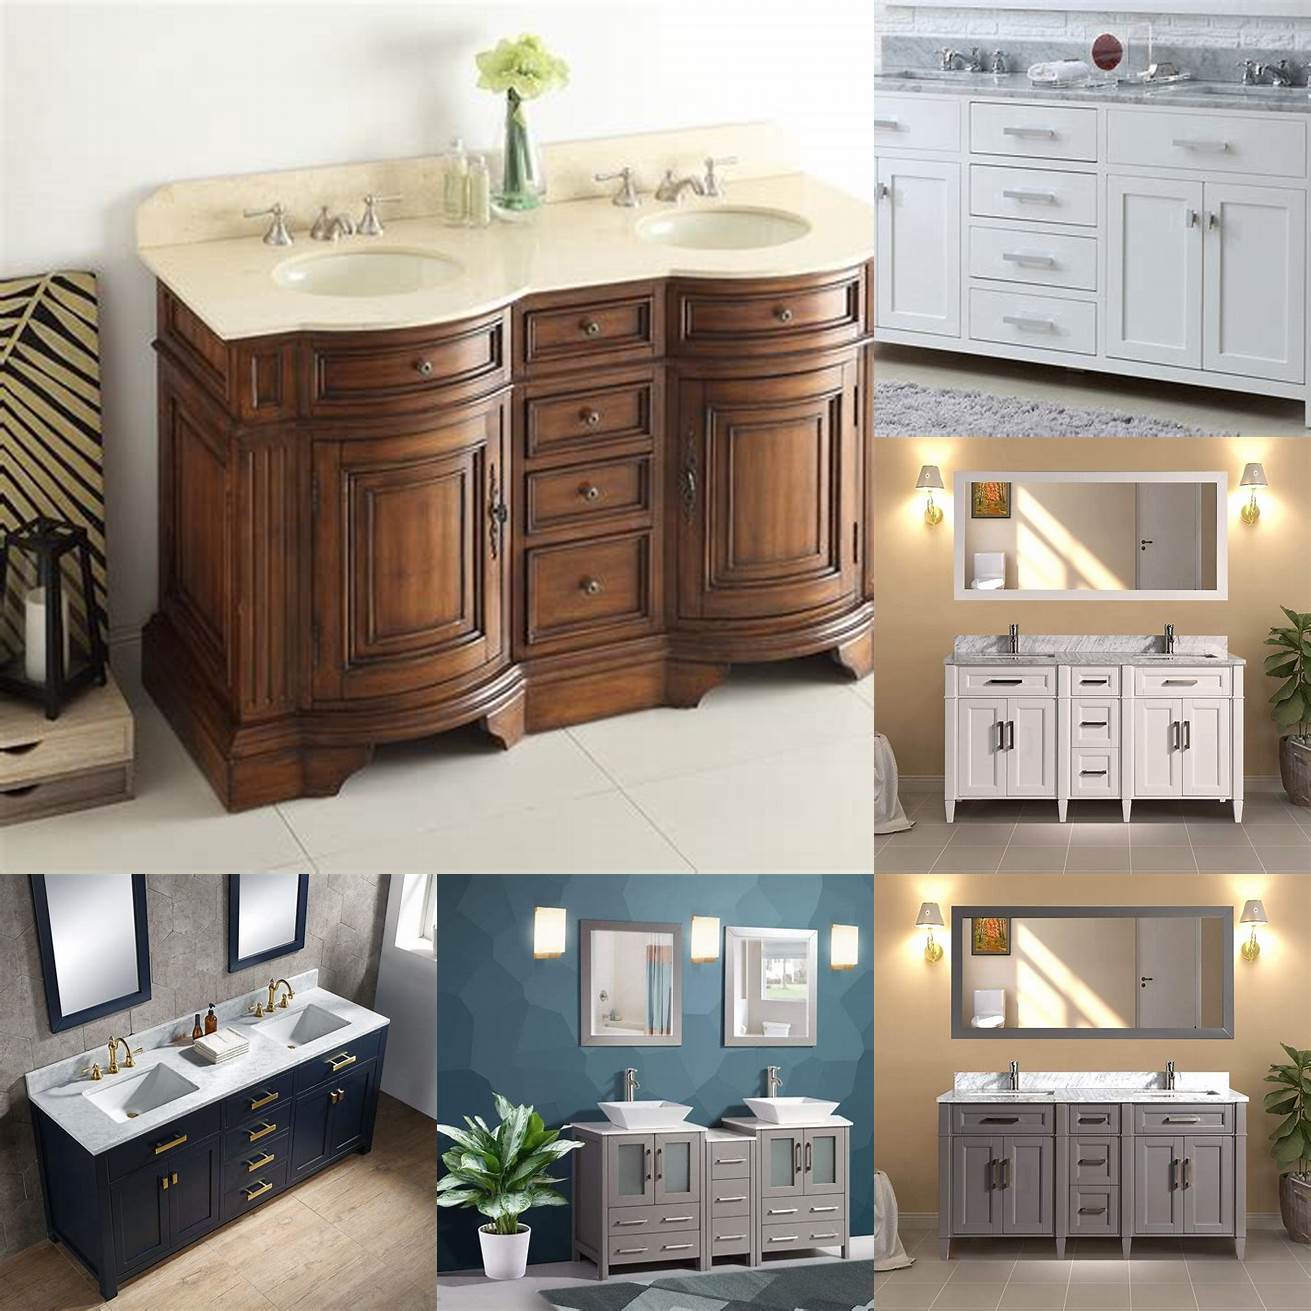 Cost A dual sink bathroom vanity can be more expensive than a single sink vanity